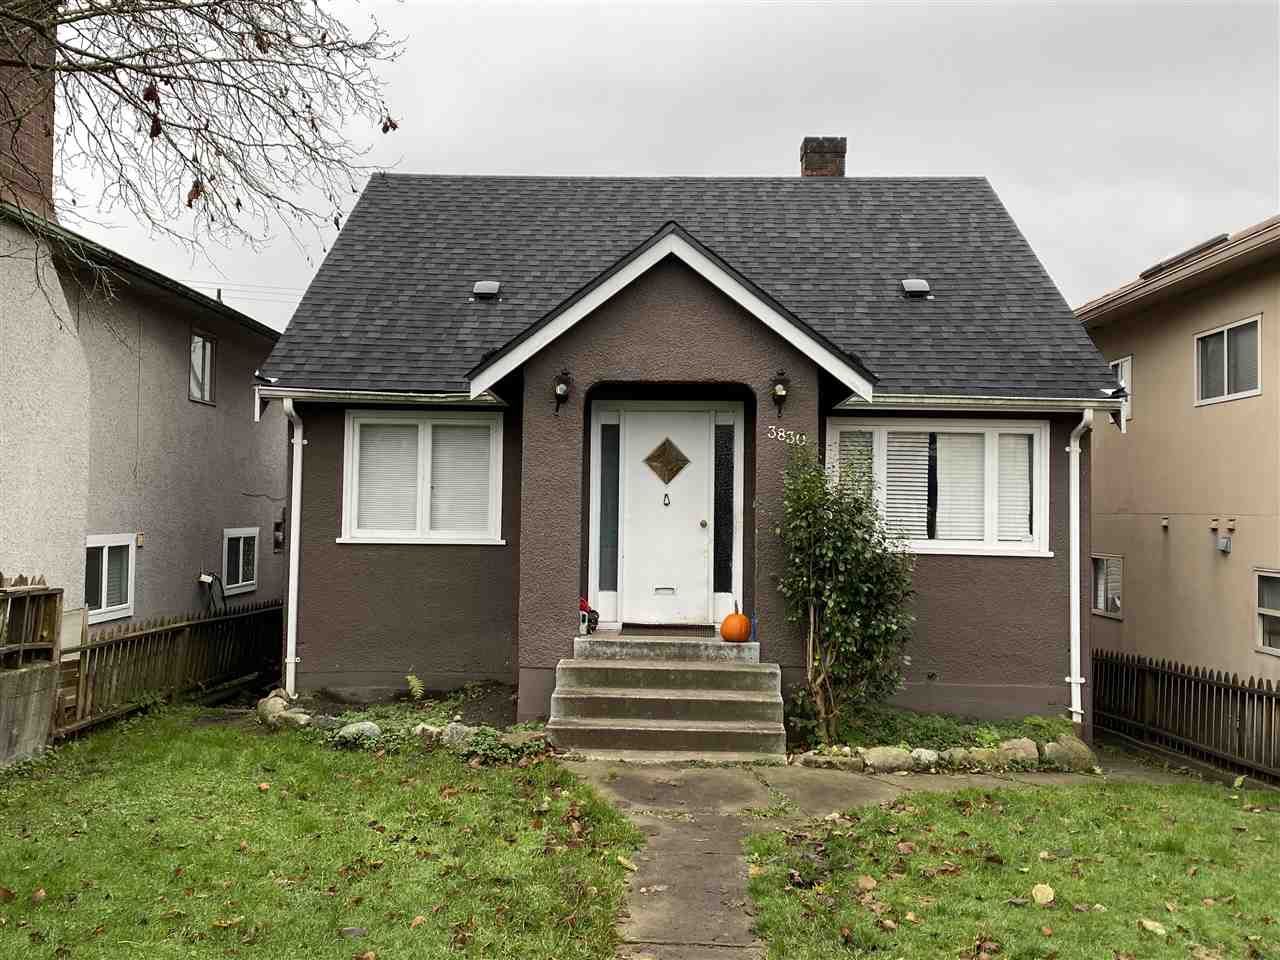 Main Photo: 3830 UNION Street in Burnaby: Willingdon Heights House for sale (Burnaby North)  : MLS®# R2521713